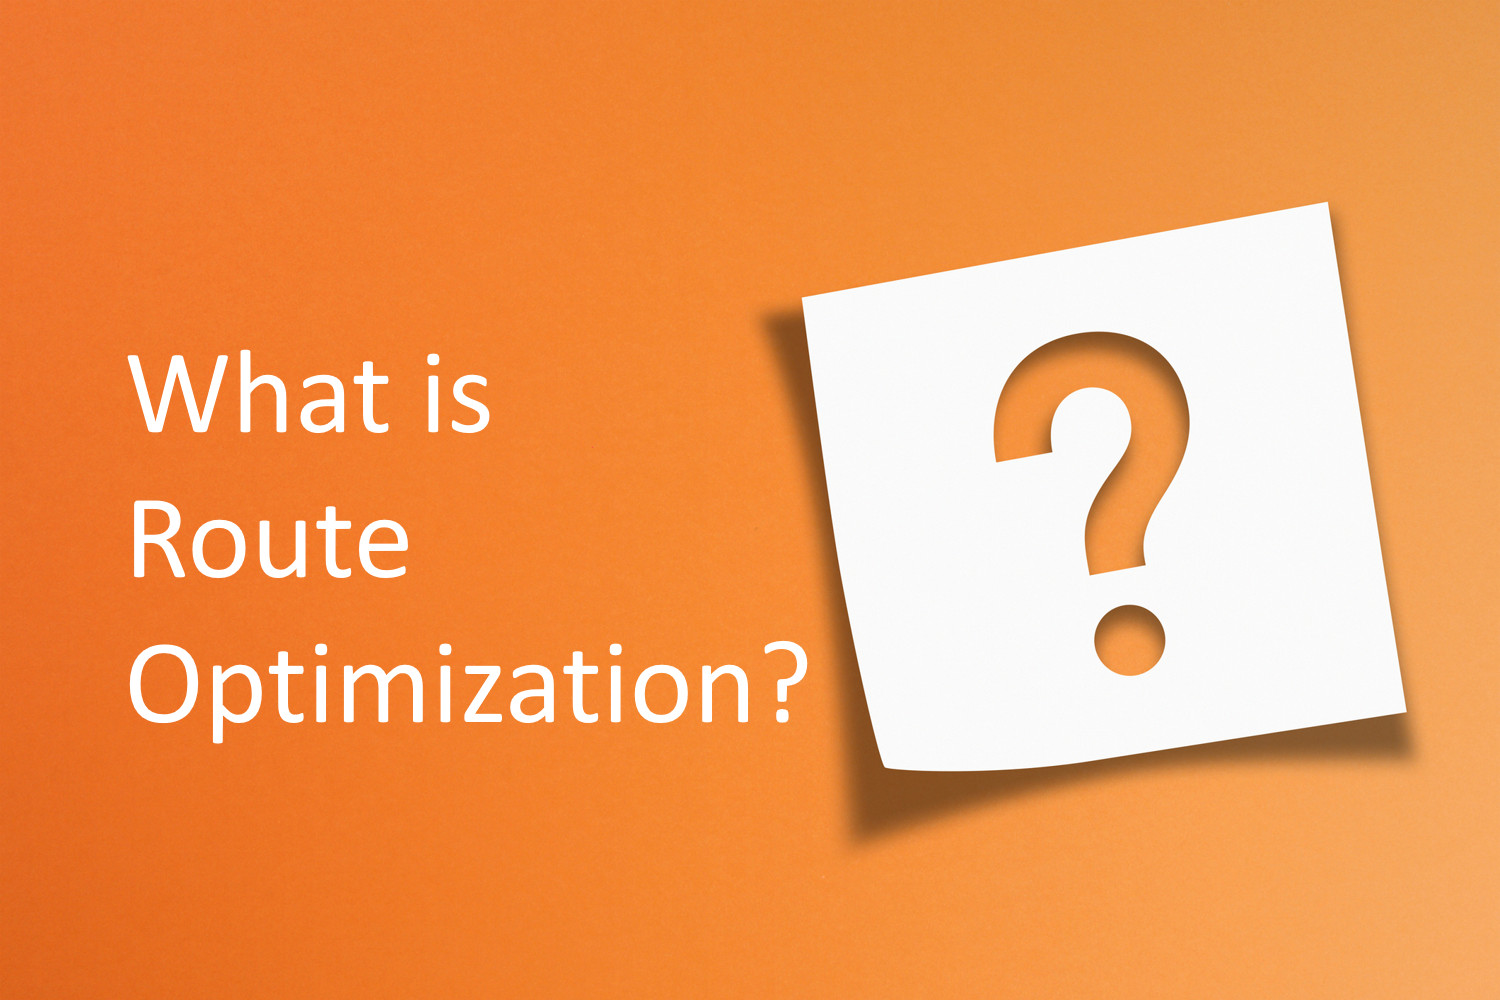 What Is Route Optimization?